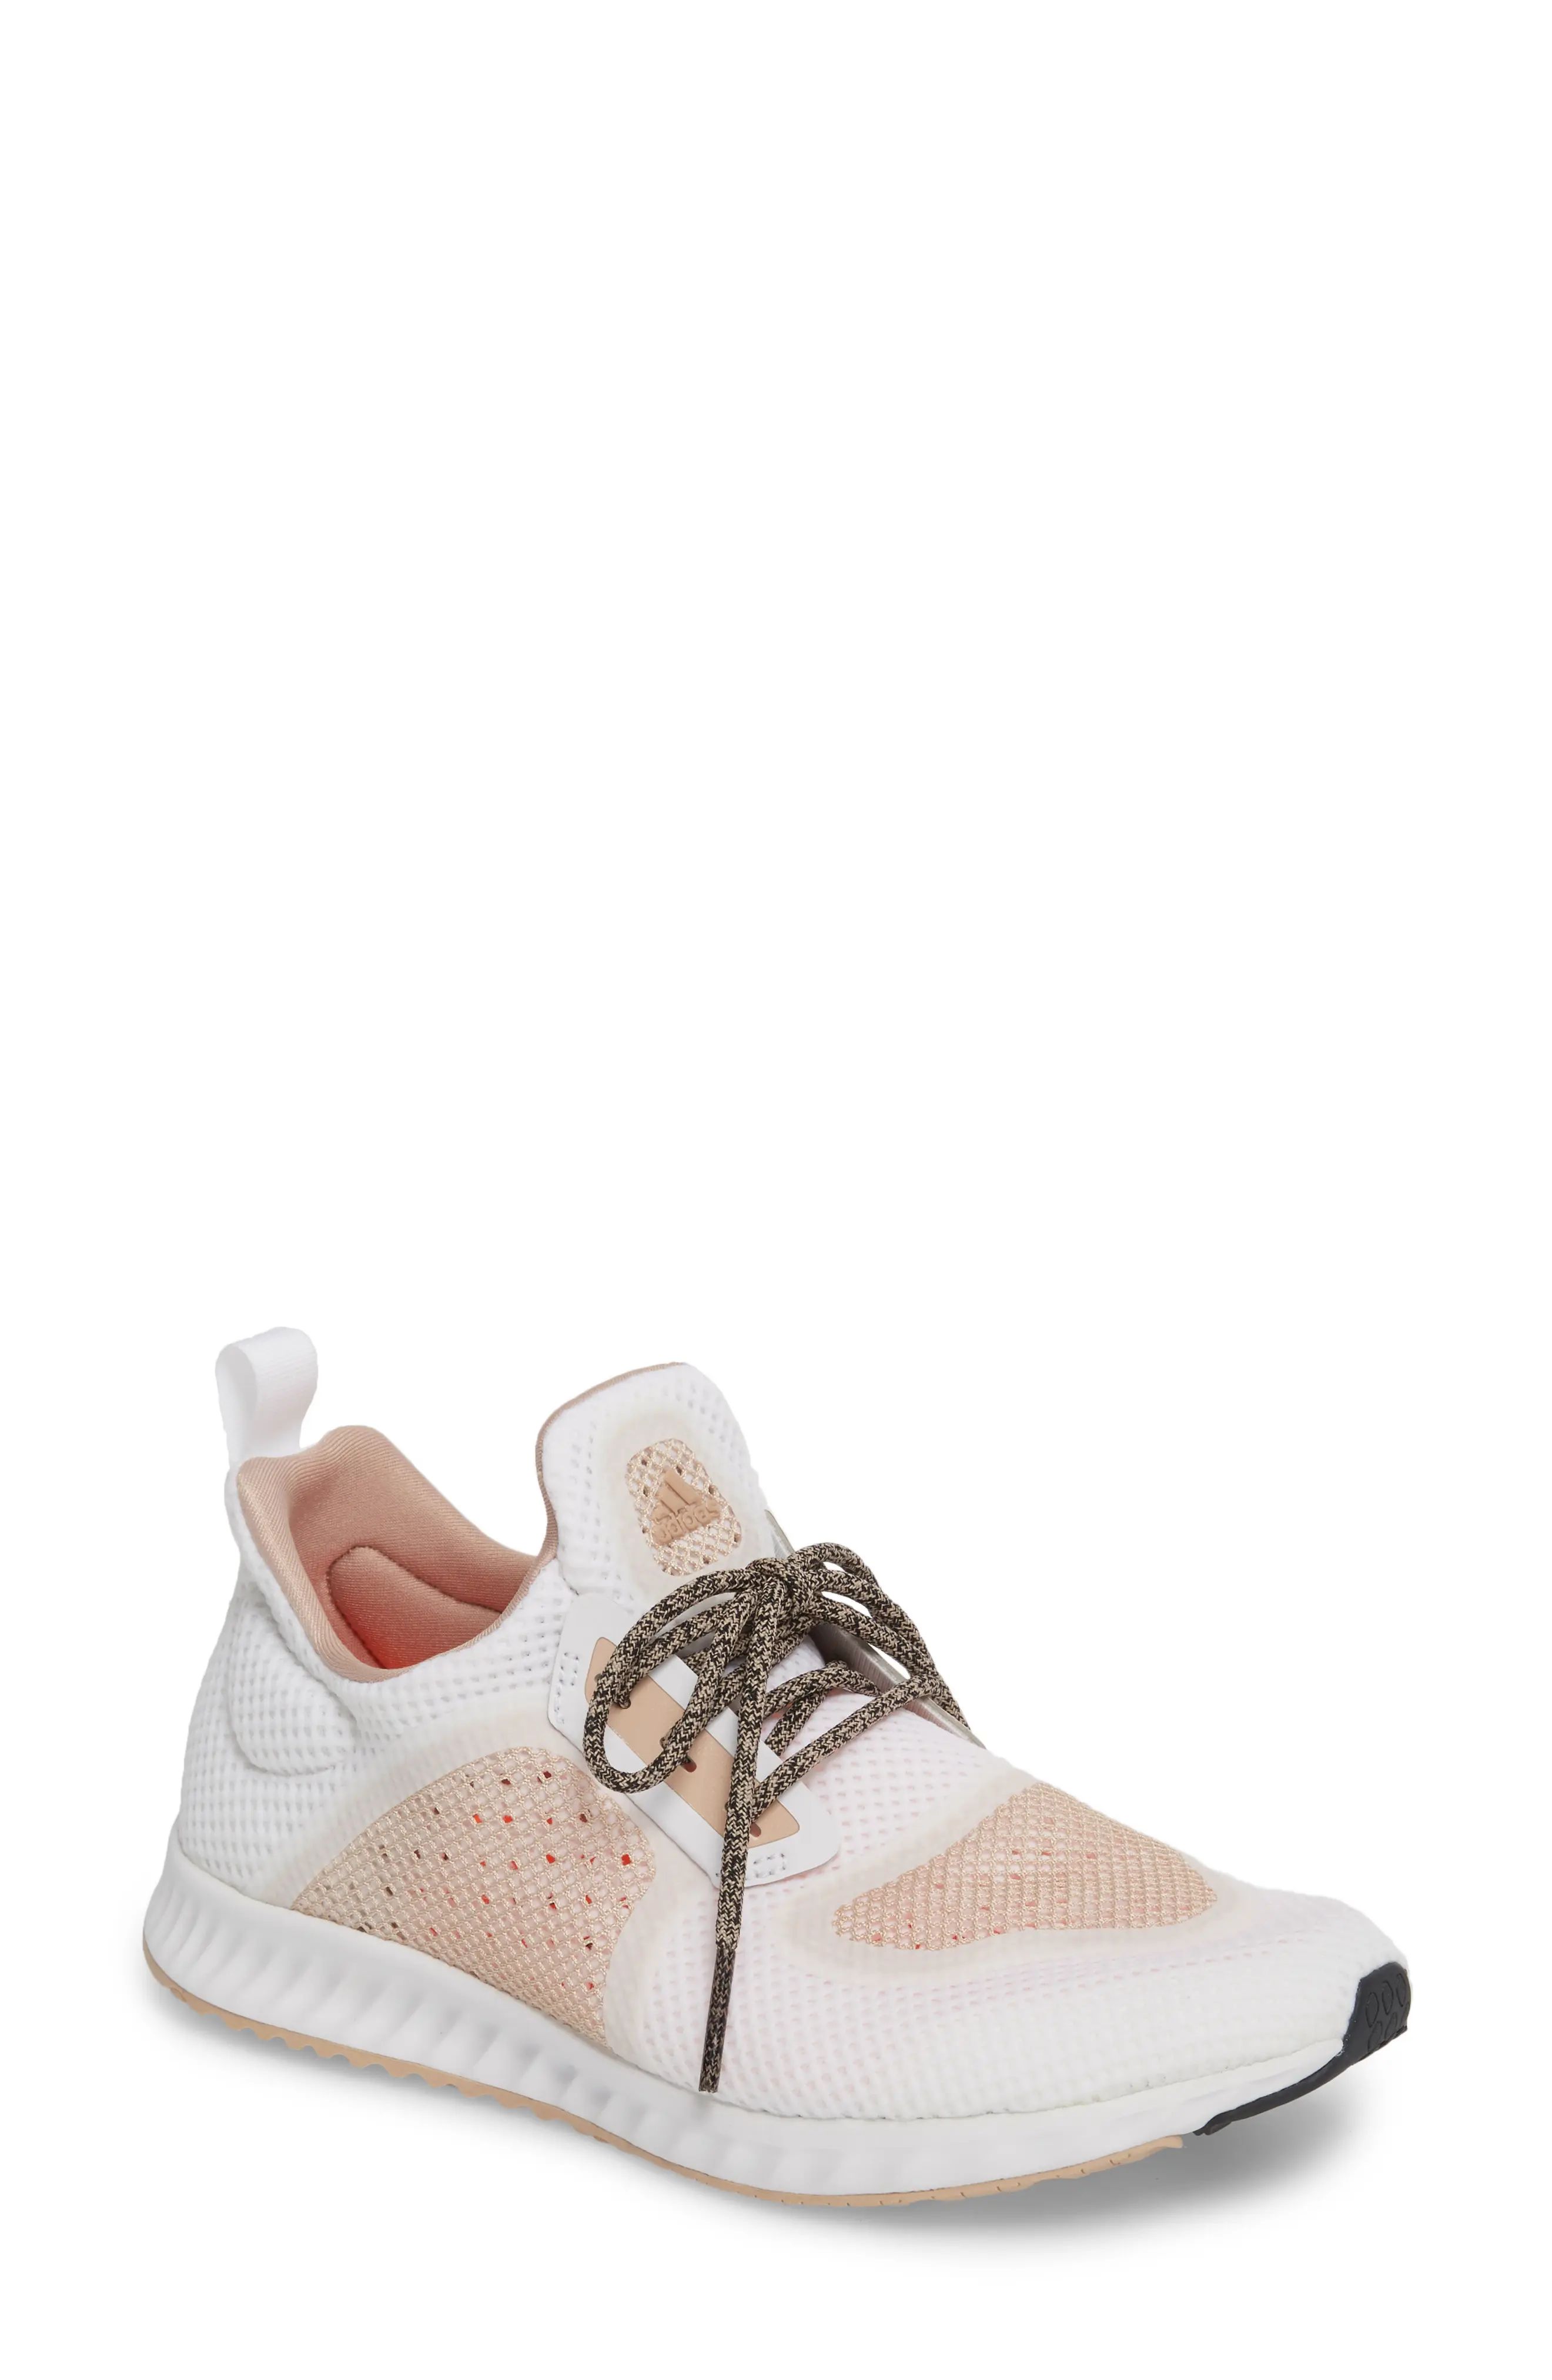 Edge Lux Clima Running Shoe | Nordstrom